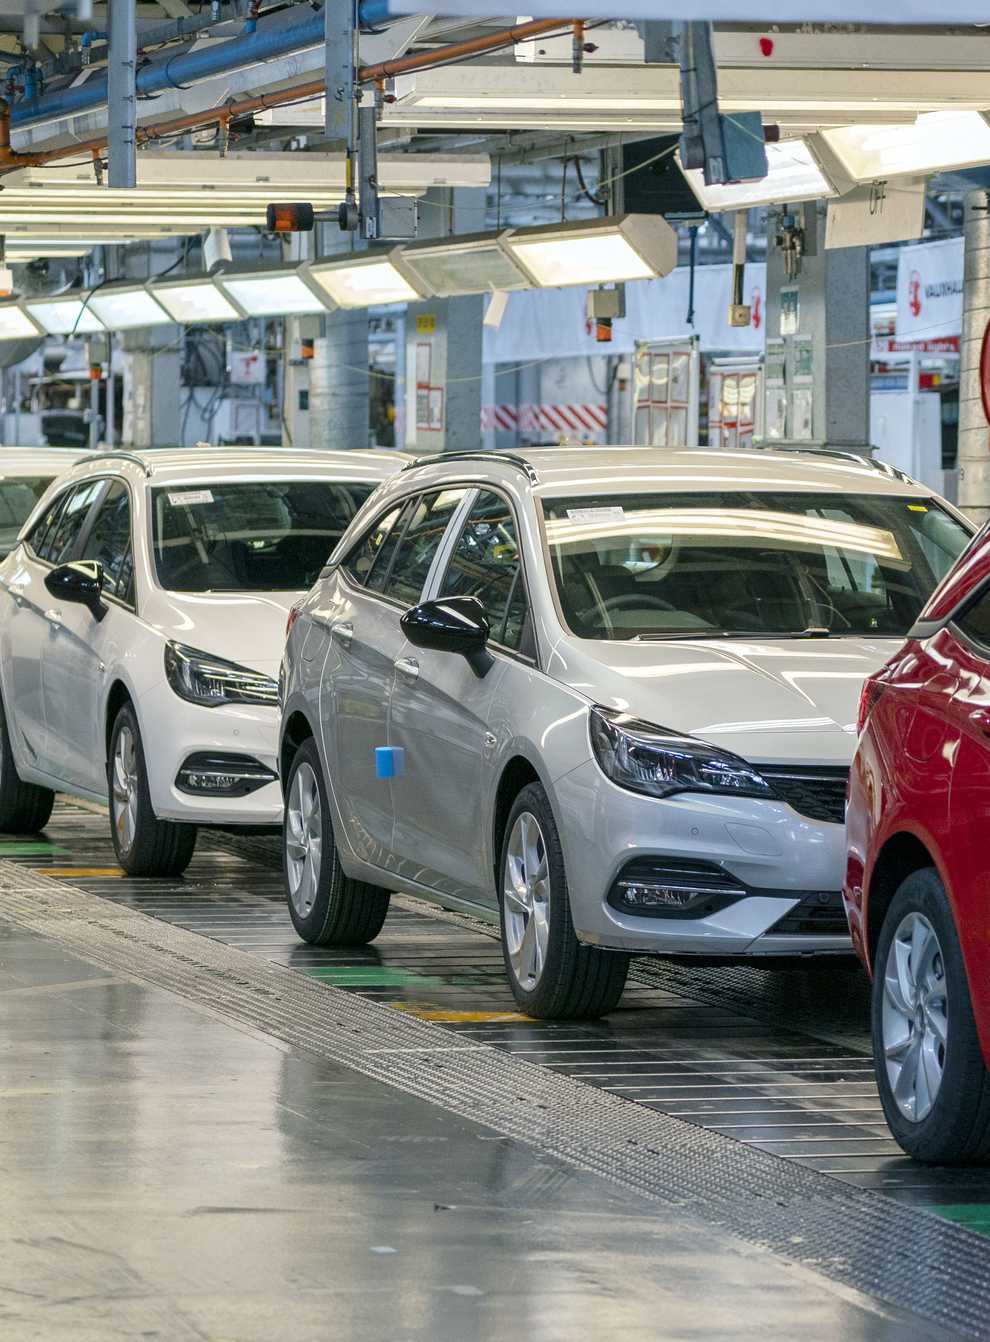 UK car production fell to its lowest level since 1956 last year as output was hit by global shortages of semiconductor chips, new figures show (Peter Byrne/PA)